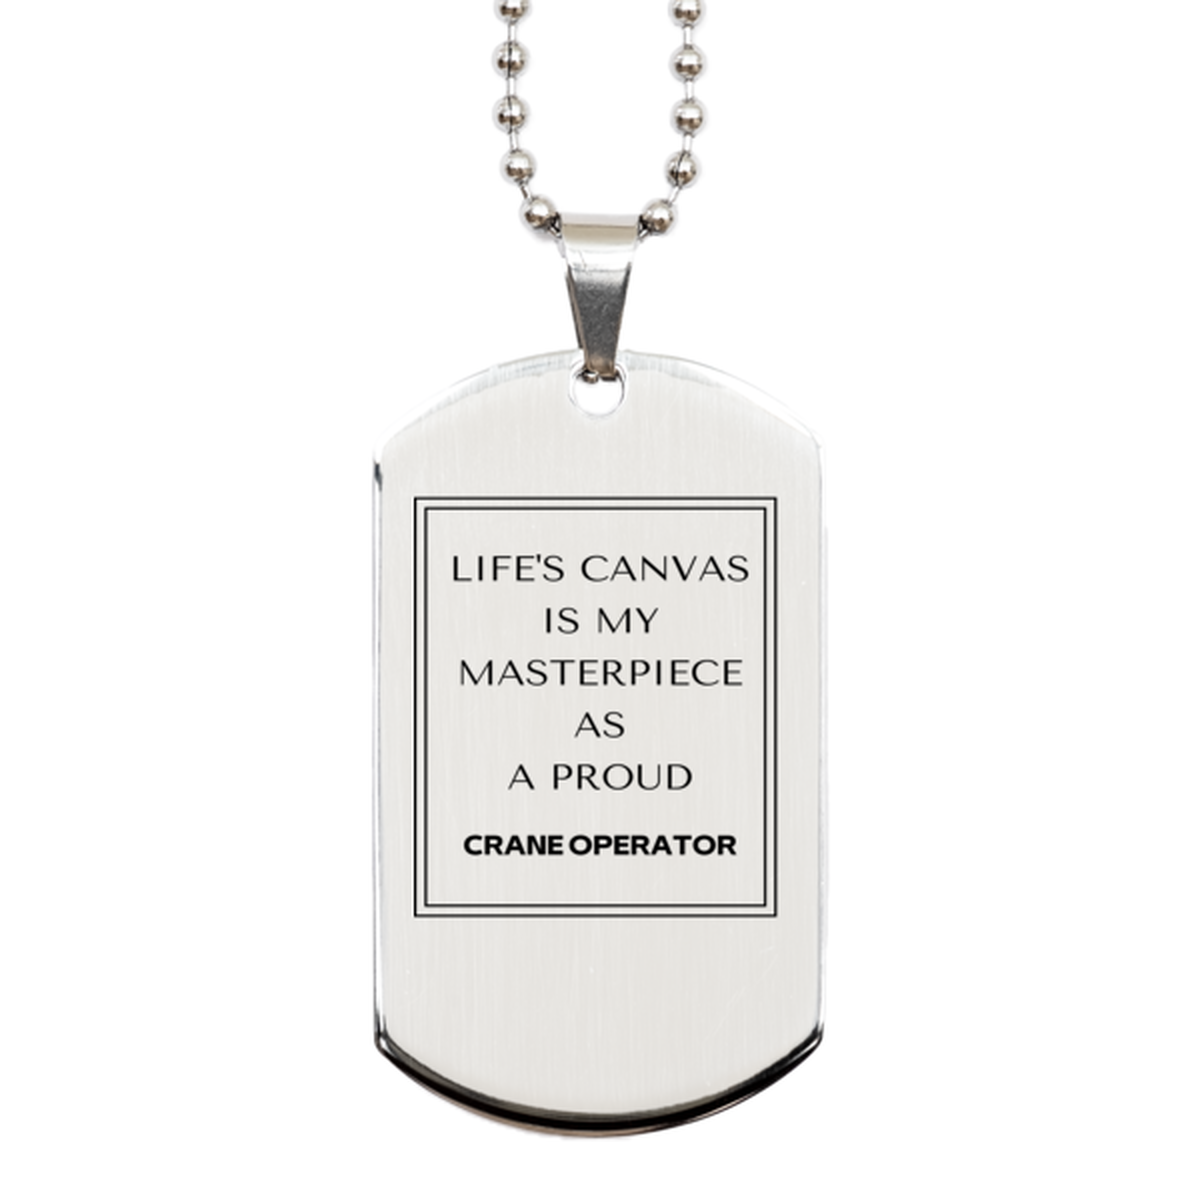 Proud Crane Operator Gifts, Life's canvas is my masterpiece, Epic Birthday Christmas Unique Silver Dog Tag For Crane Operator, Coworkers, Men, Women, Friends